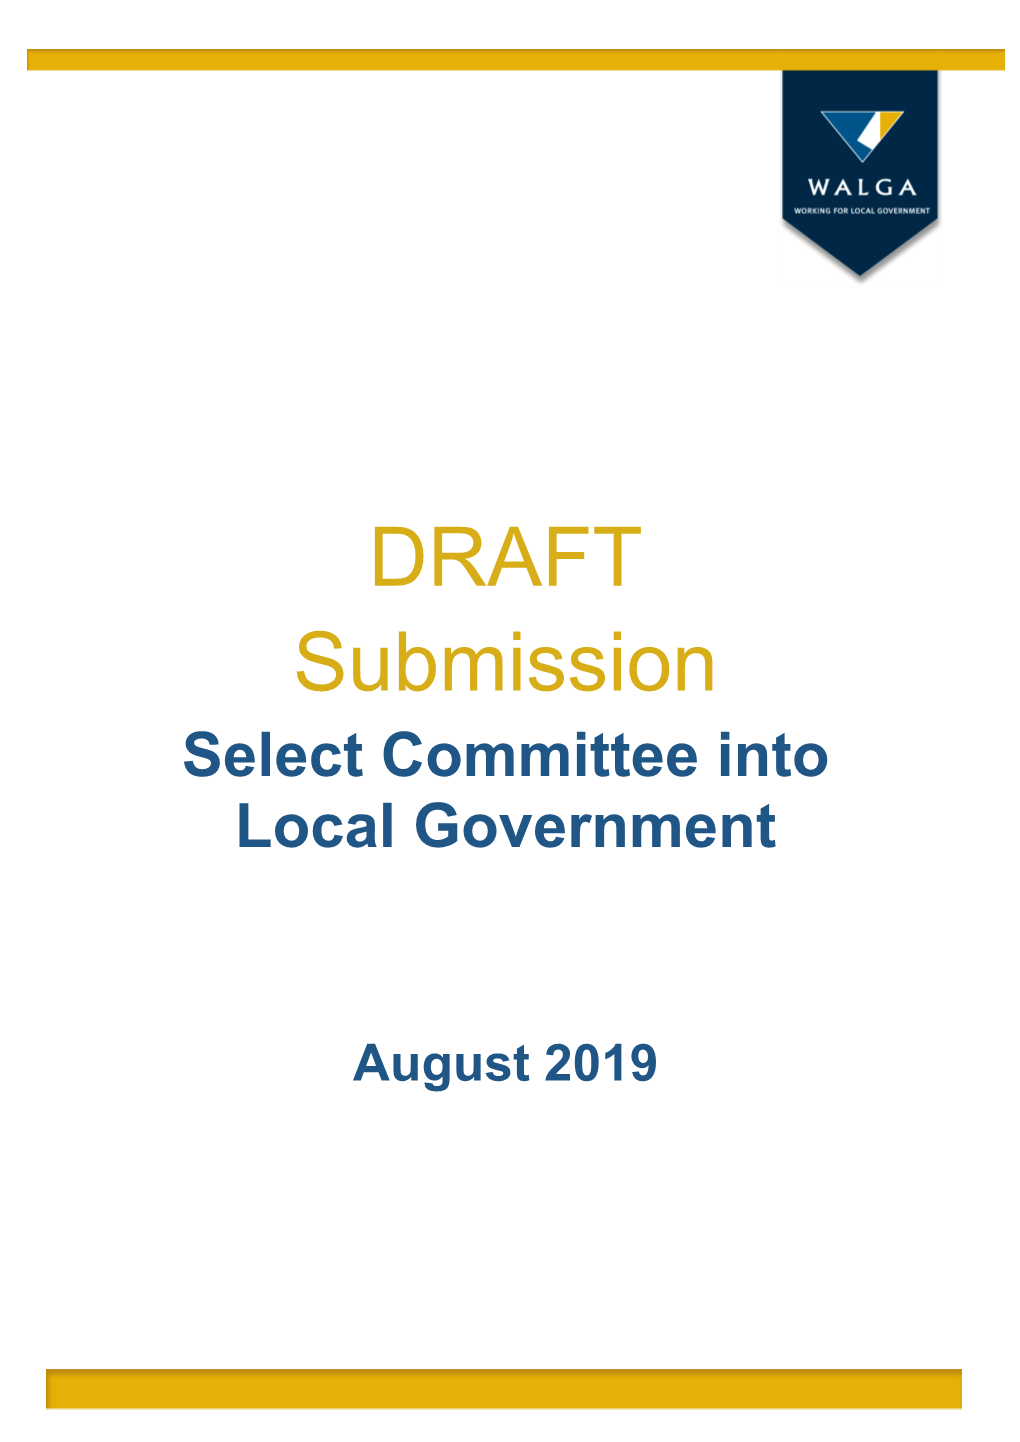 DRAFT Submission Select Committee Into Local Government